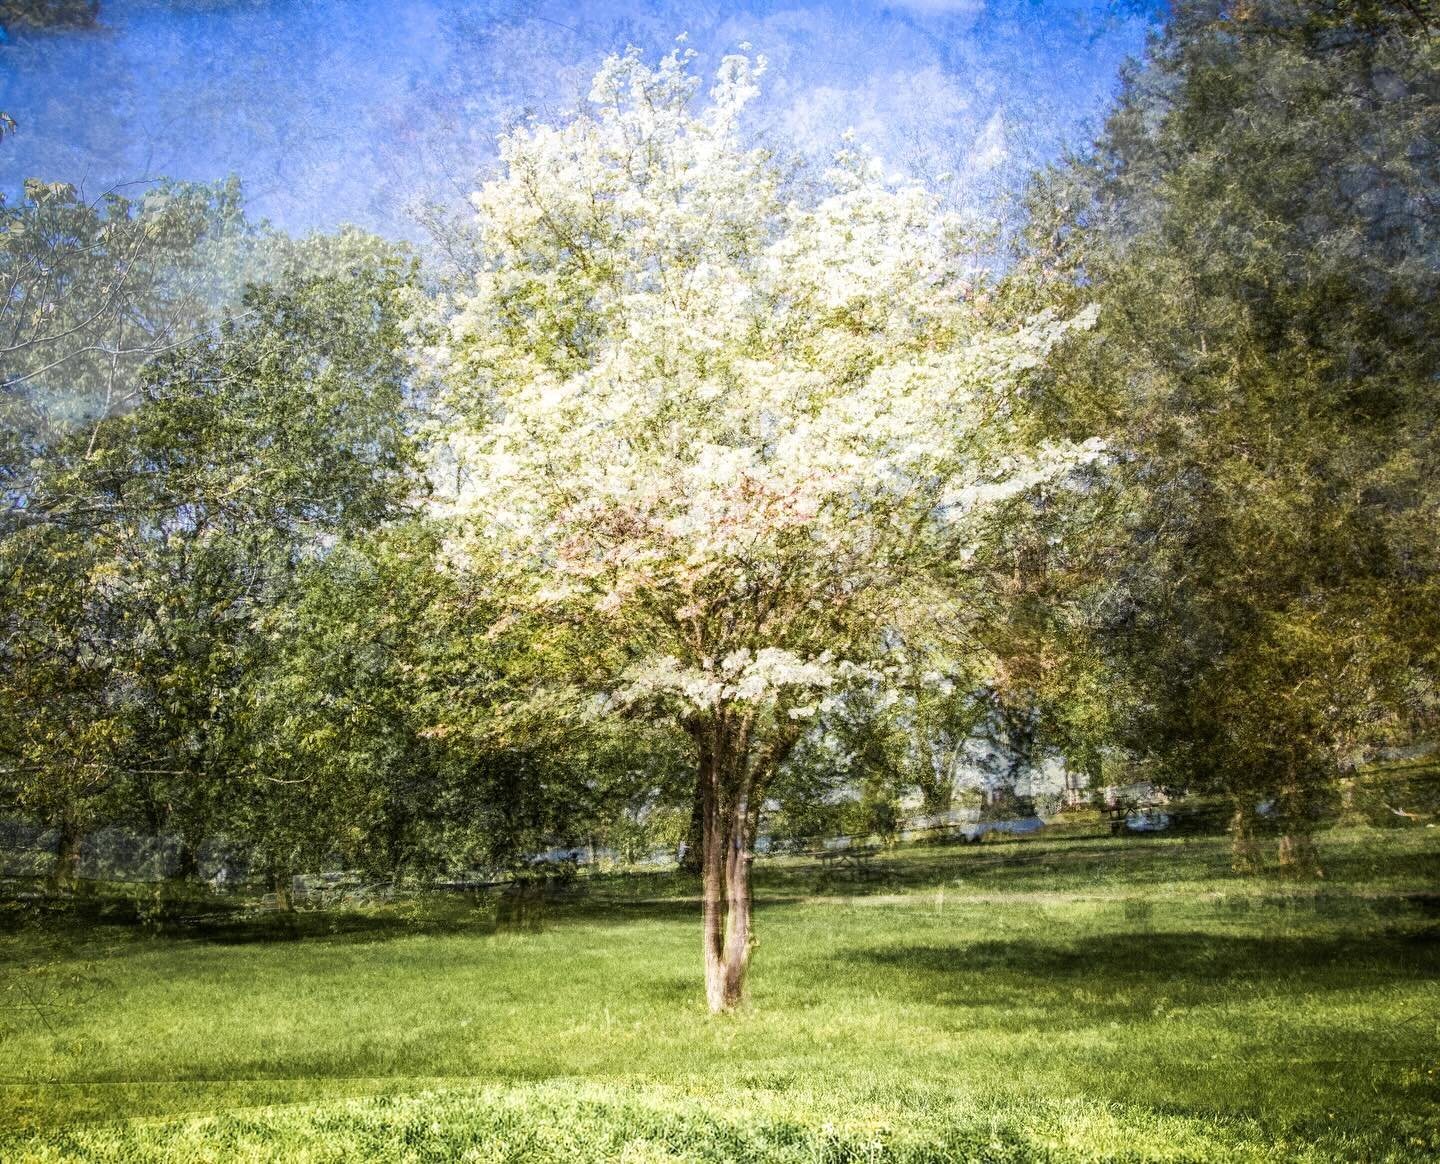 Today is Earth Day. Treat the planet well and appreciate all the beauty it offers. 

#intentionalcameramovement
#icm_community
#icm_world
#icmphotomagazine
#intentionalblur
#blur
#bluronpurpose 
#abstractphotography
#impressionistphotography
#painter